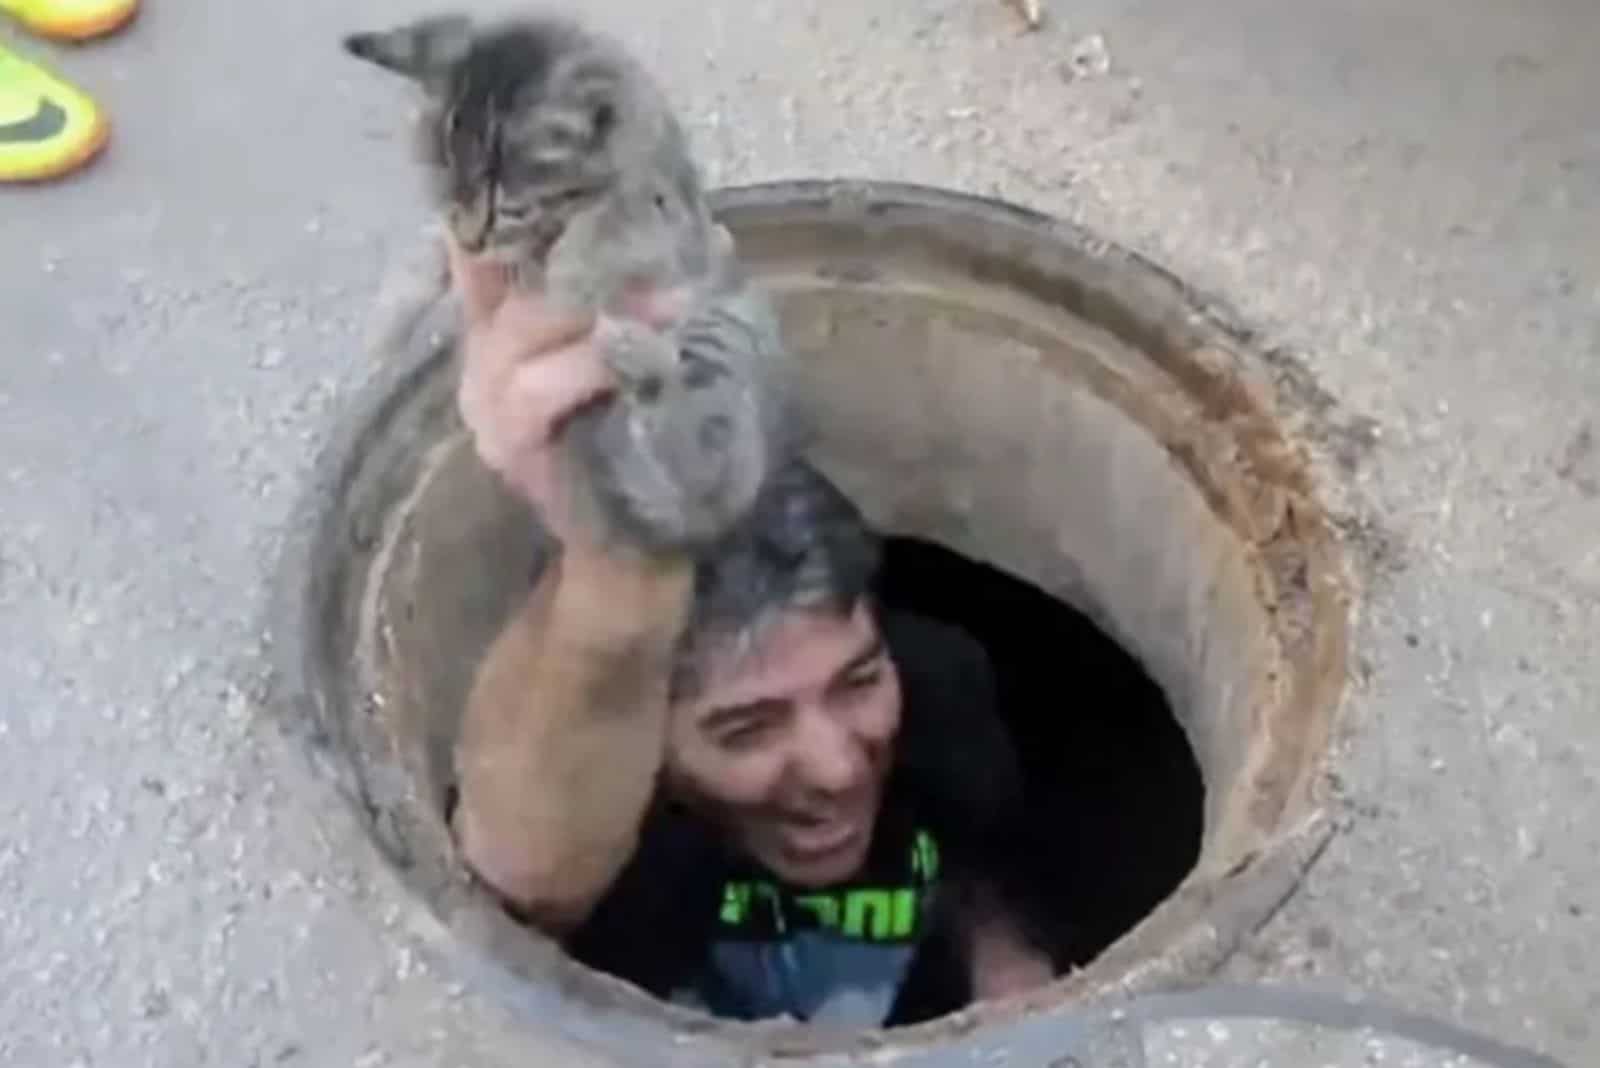 man comes out of a storm drain holding a saved kitten